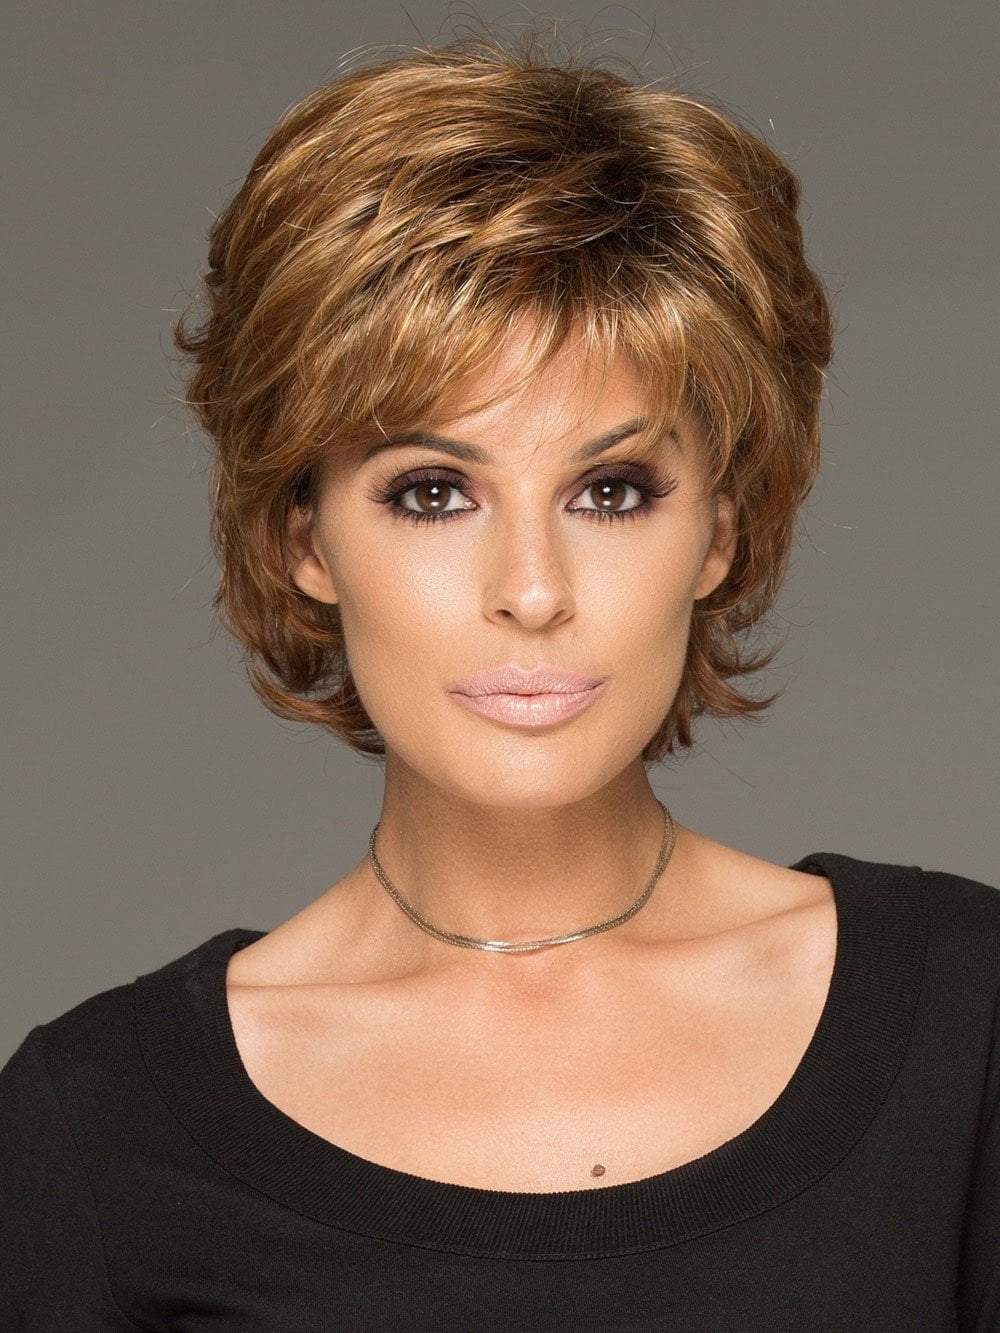 From spiky to softer this short wig is designed to compliment many age ranges